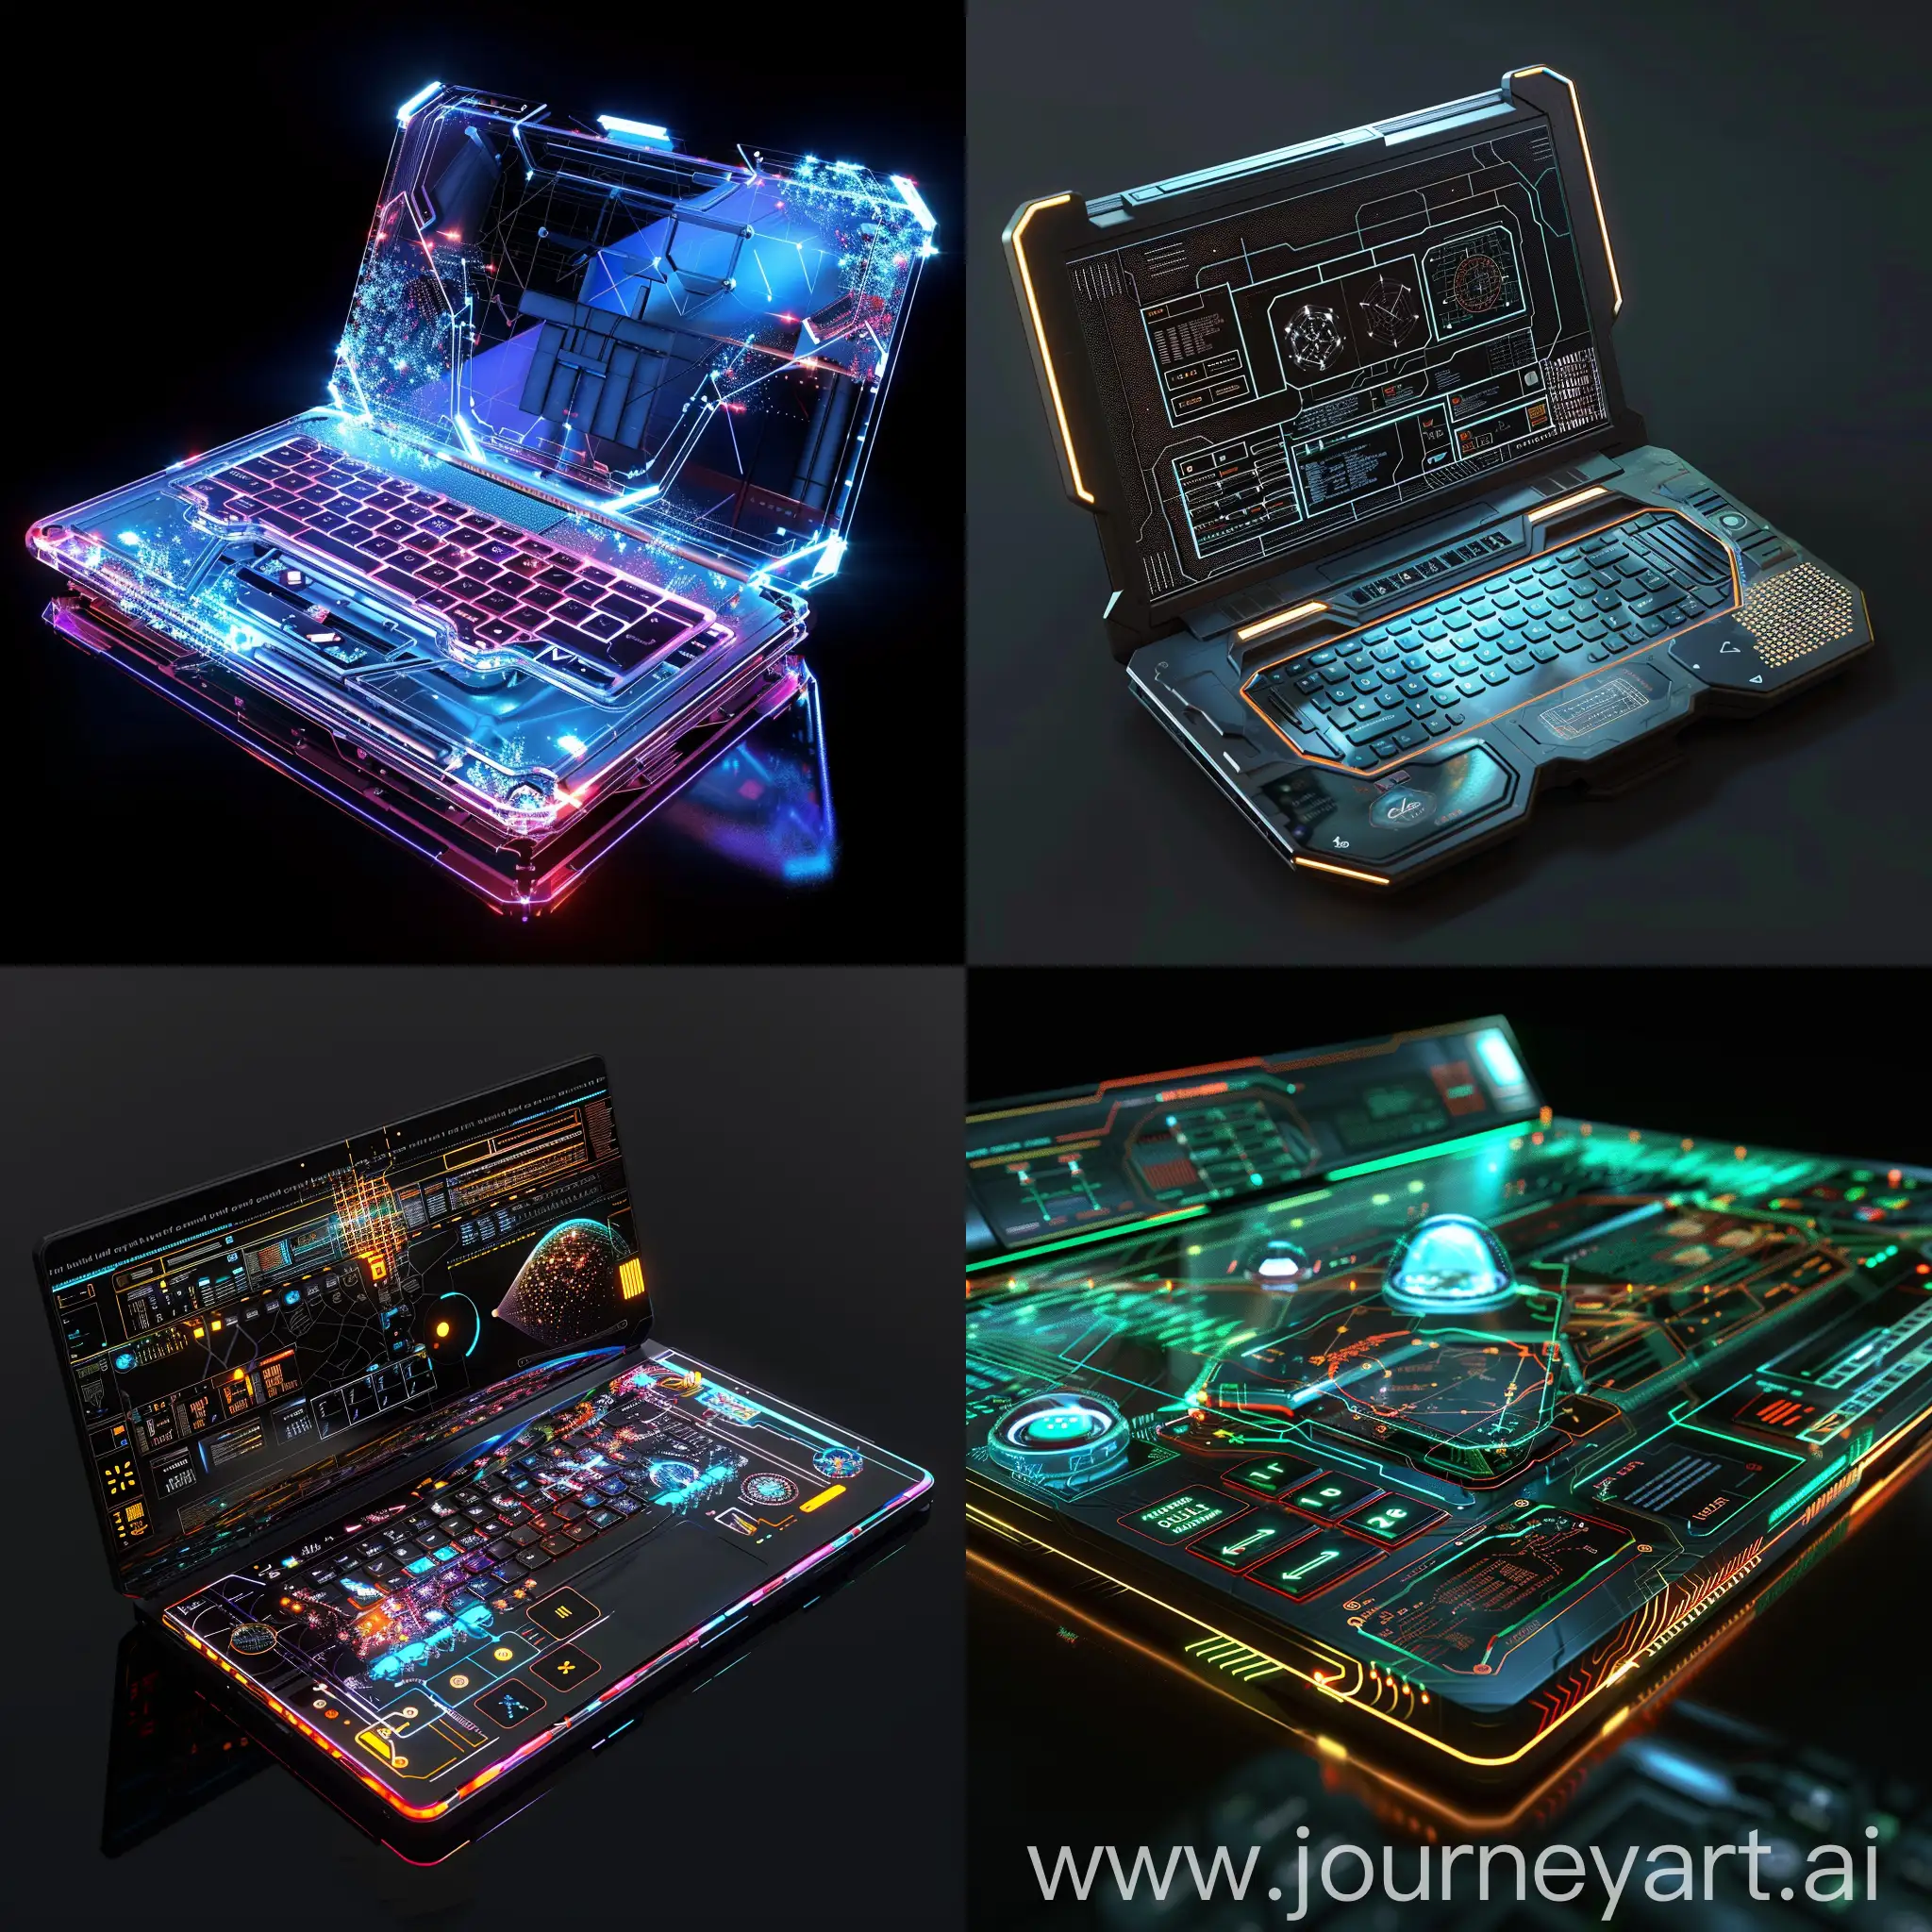 Advanced-Science-Fiction-Laptop-with-Organic-and-Modular-Design-Elements